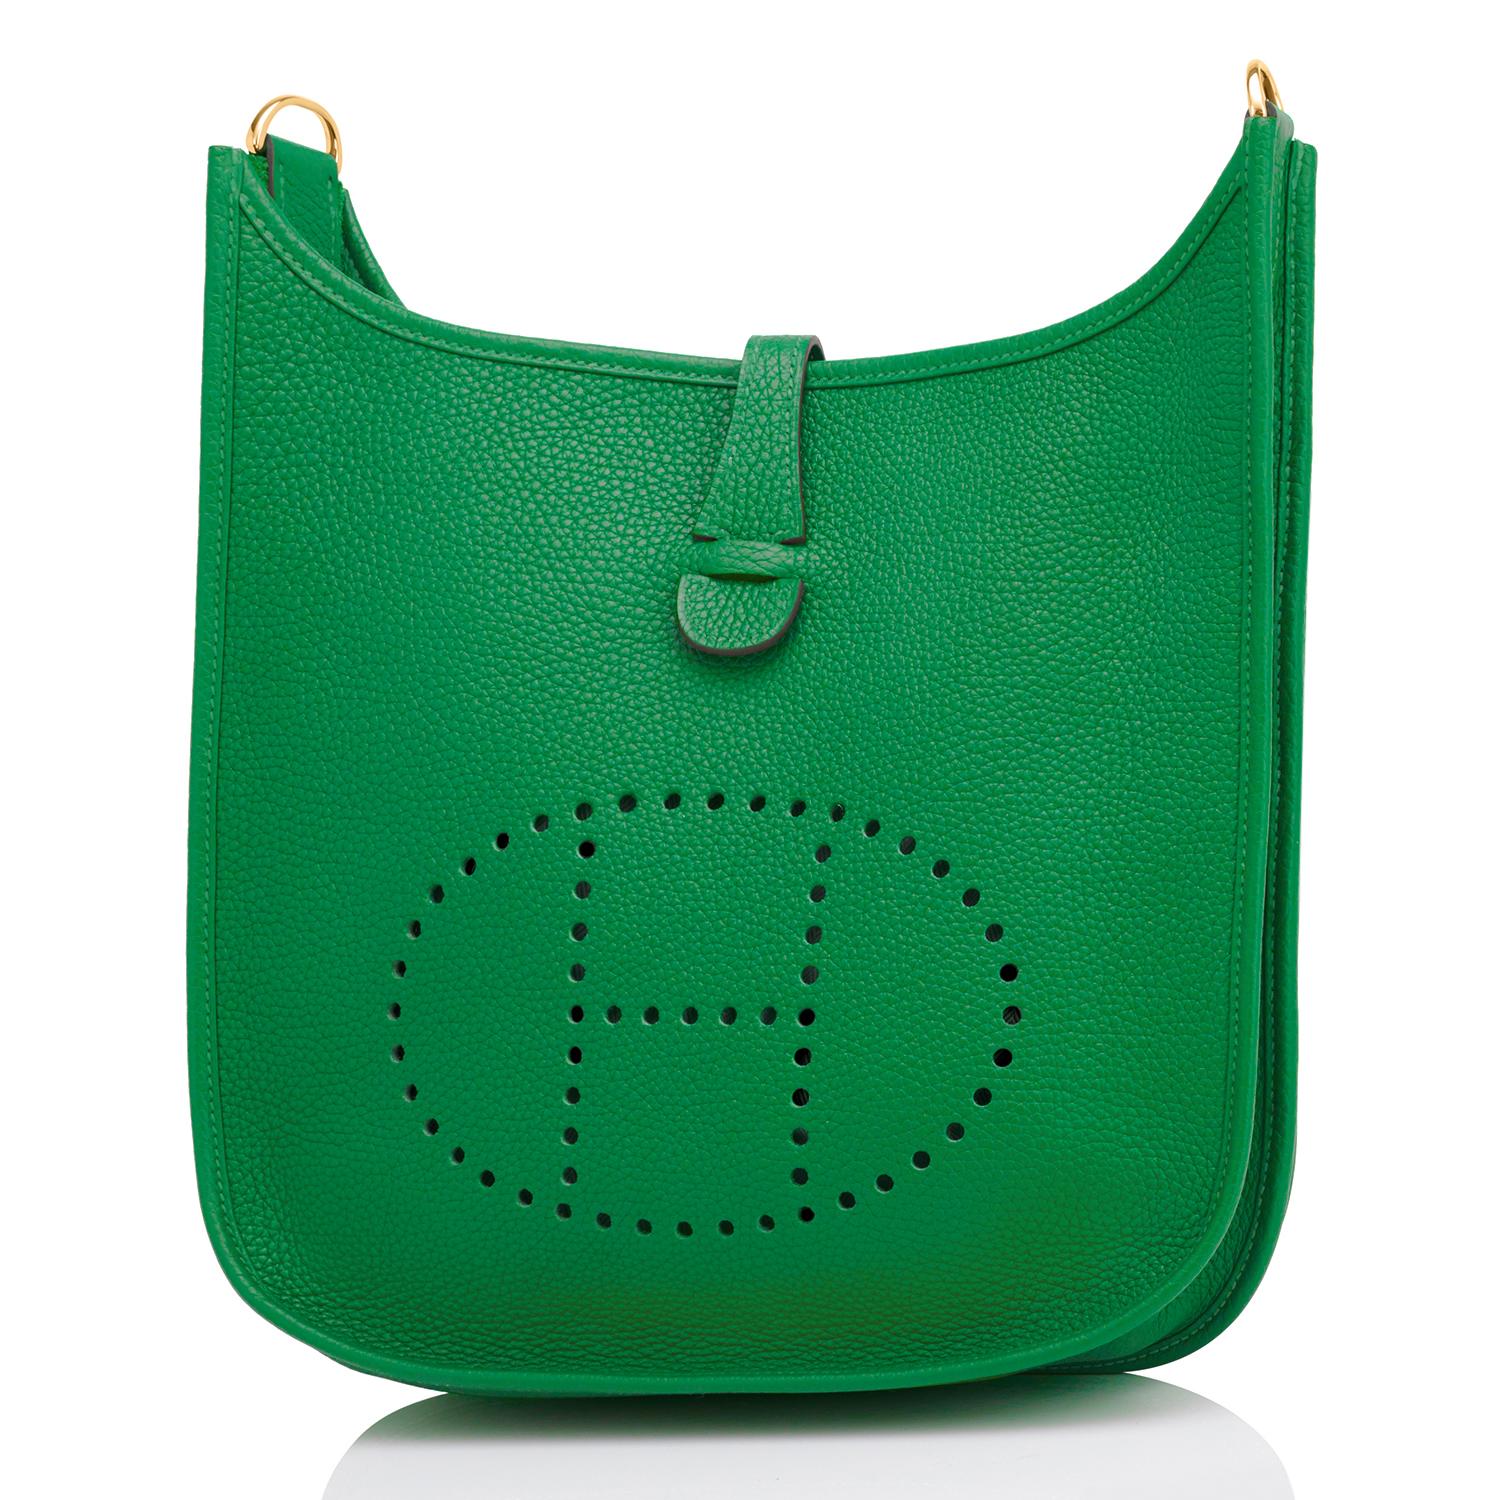 Hermes Bambou Green Evelyne III 29cm PM Cross-Body Messenger Bag NEW GIFT
Brand New in Box. Store Fresh. Pristine condition.
Perfect gift! Comes with with shoulder strap, sleeper for bag and signature orange Hermes box box.
This is the iconic Hermes